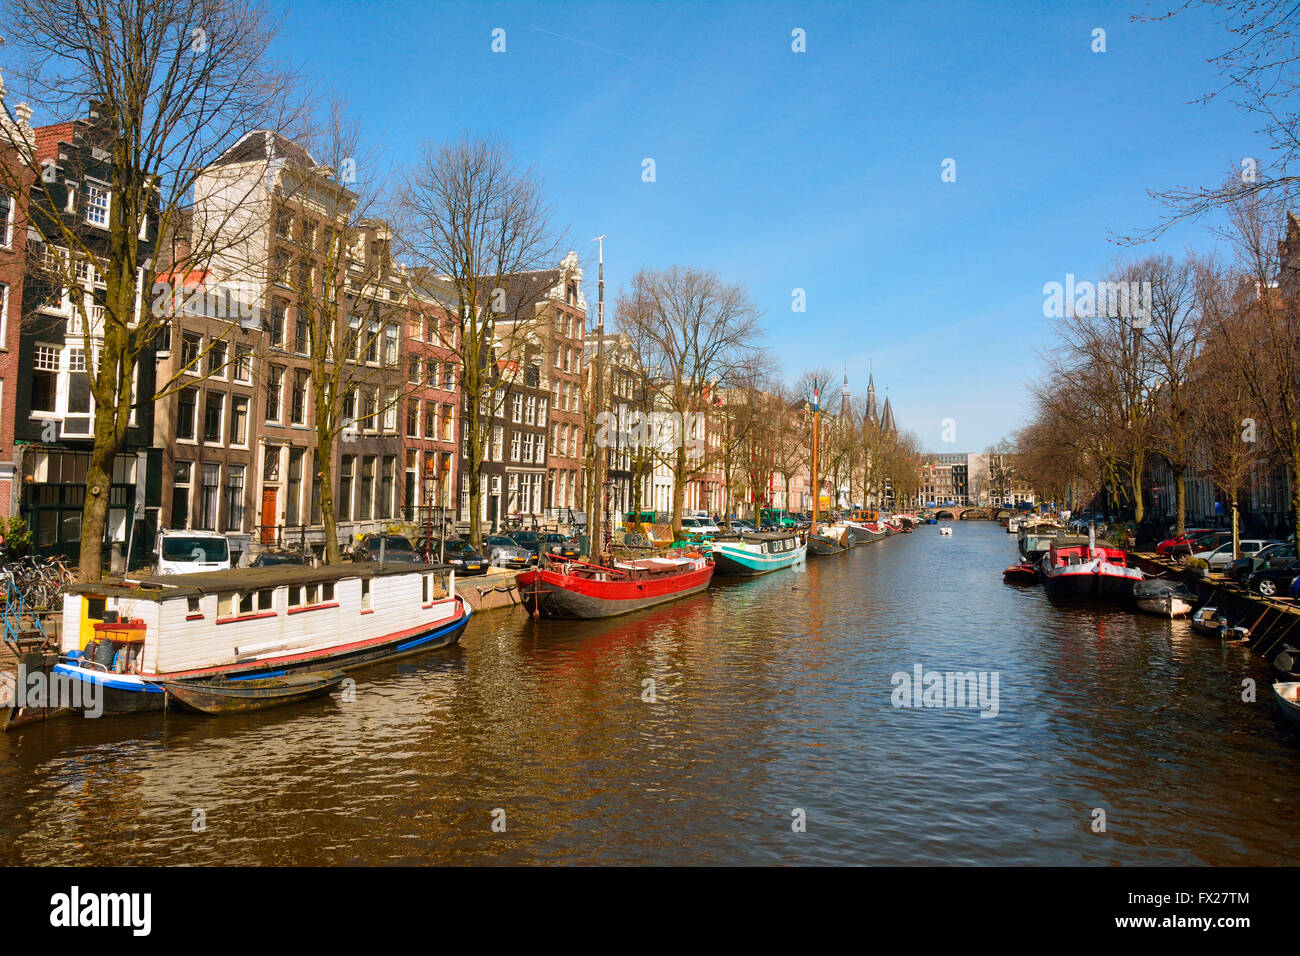 View over Keizersgracht canal in Amsterdam. Stock Photo